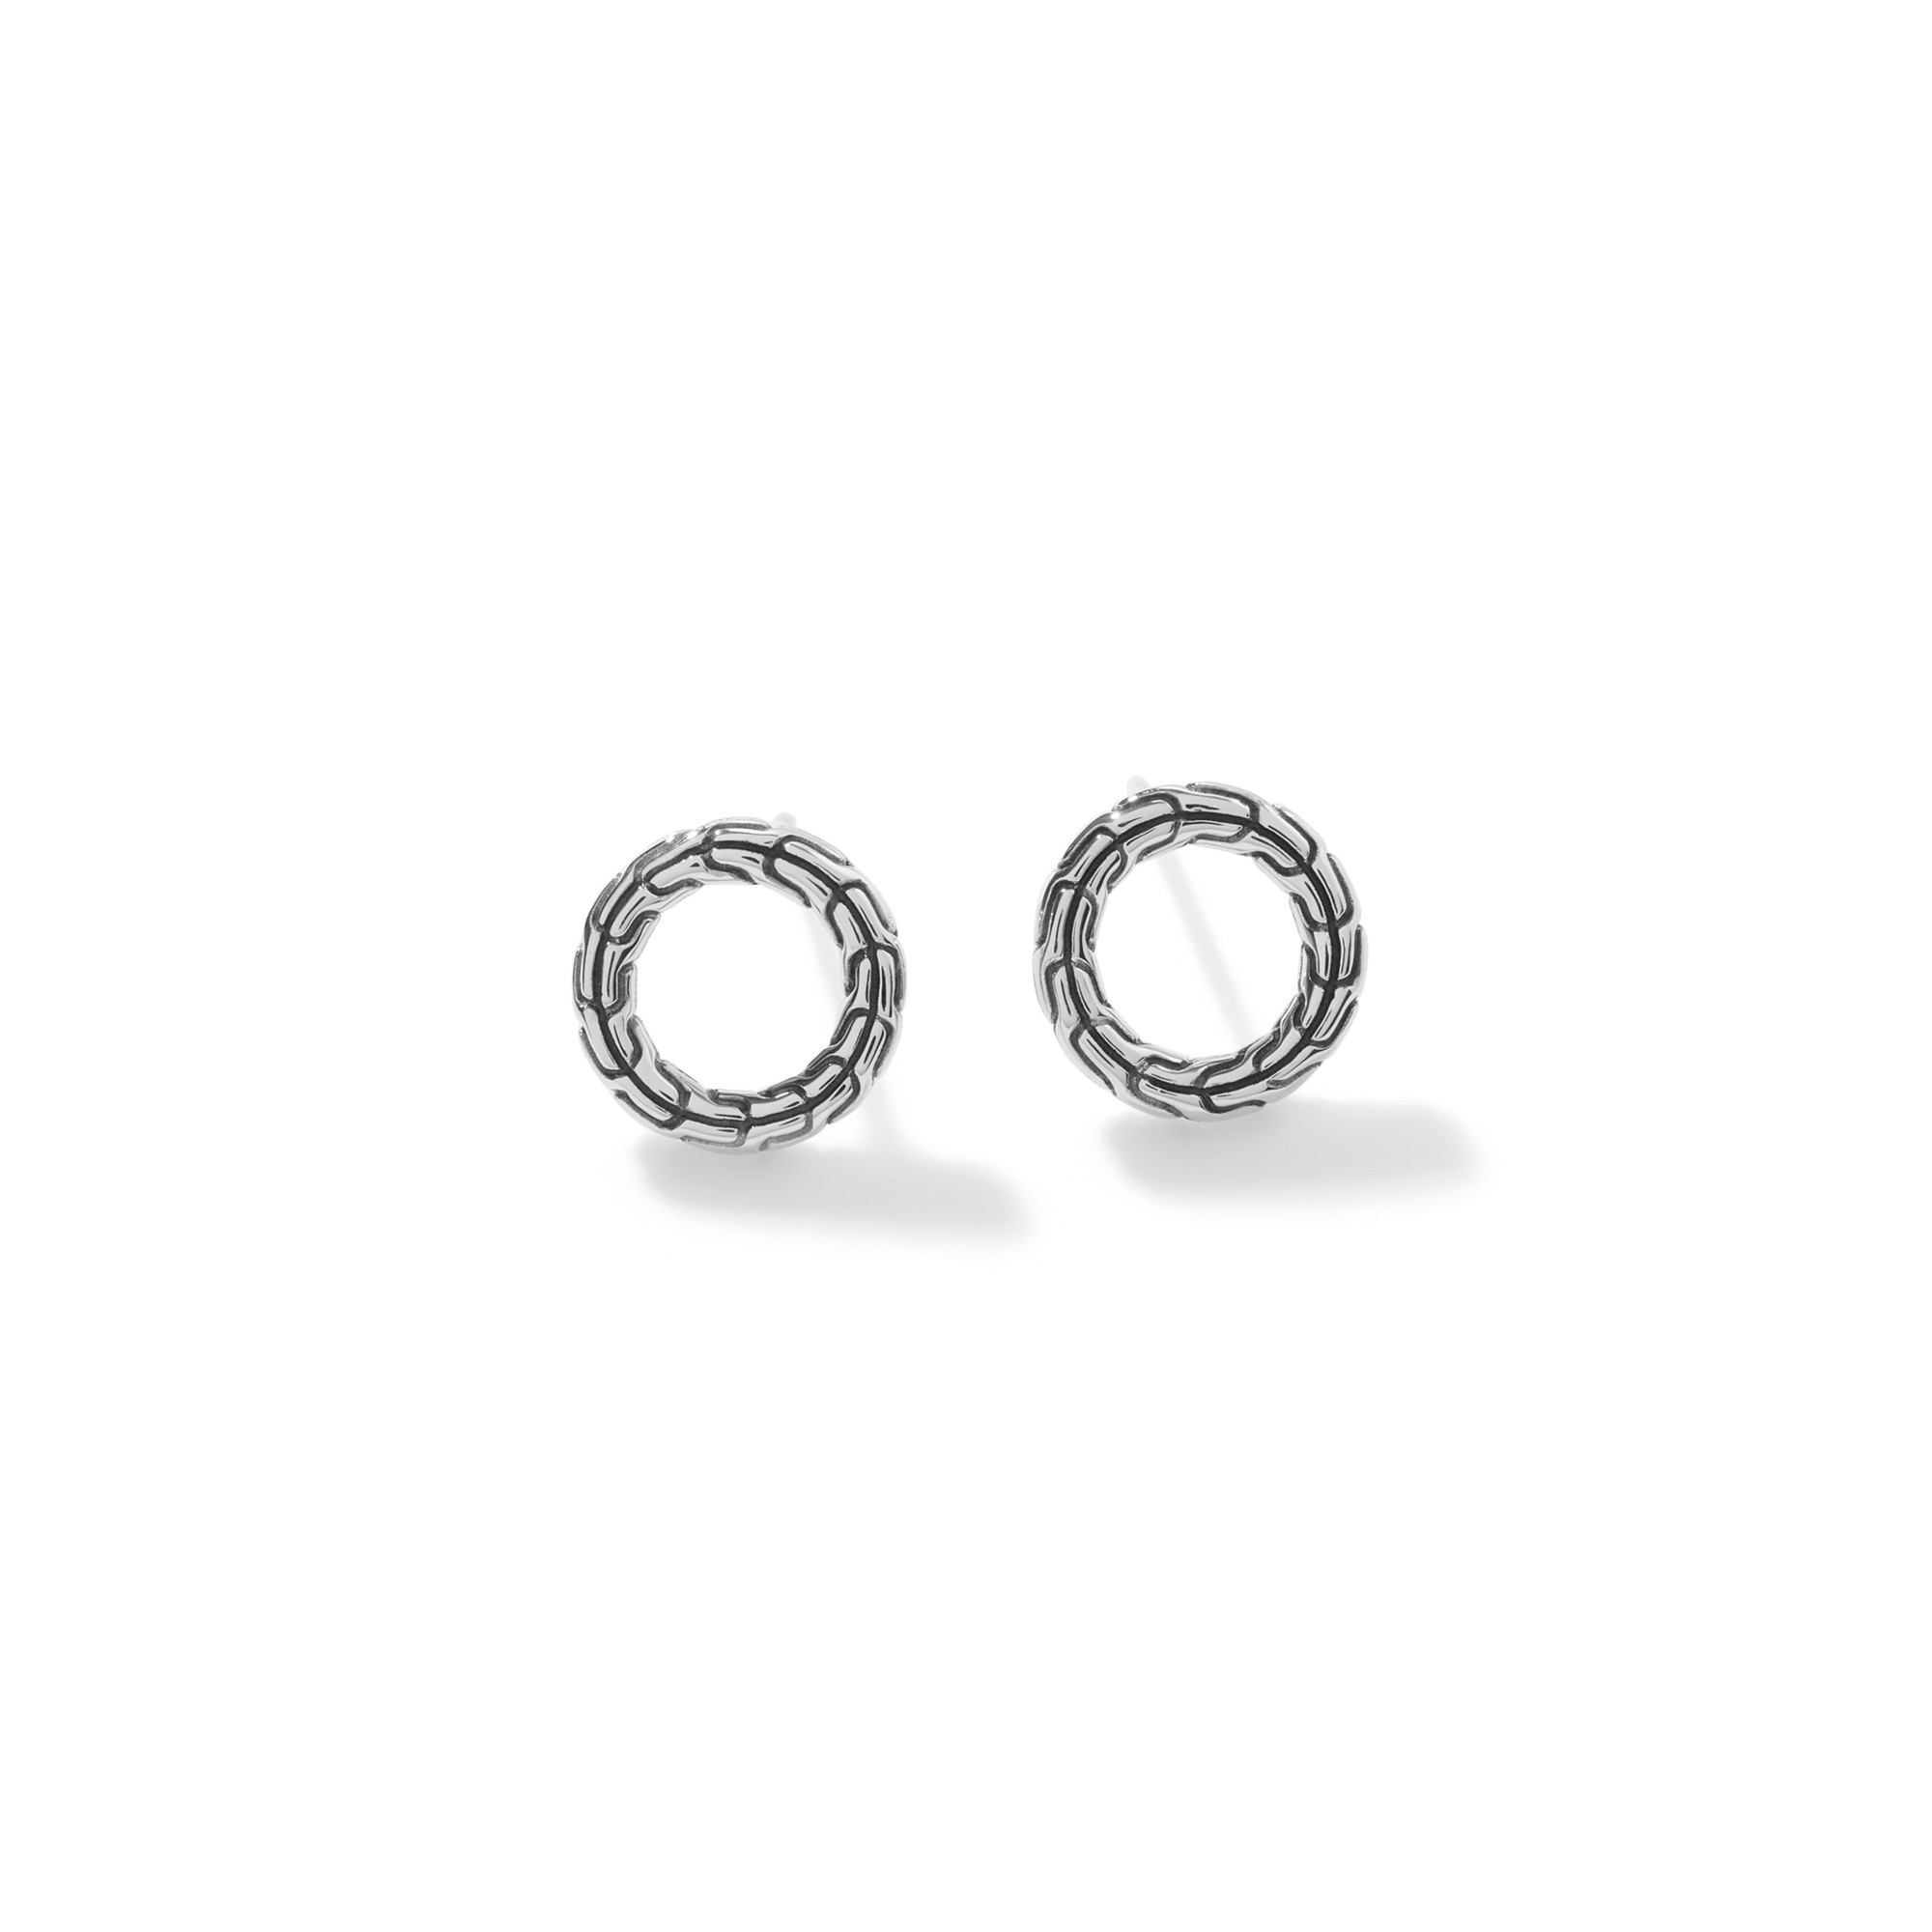 443162Classic Chain 12.5mm Round Stud Earrings